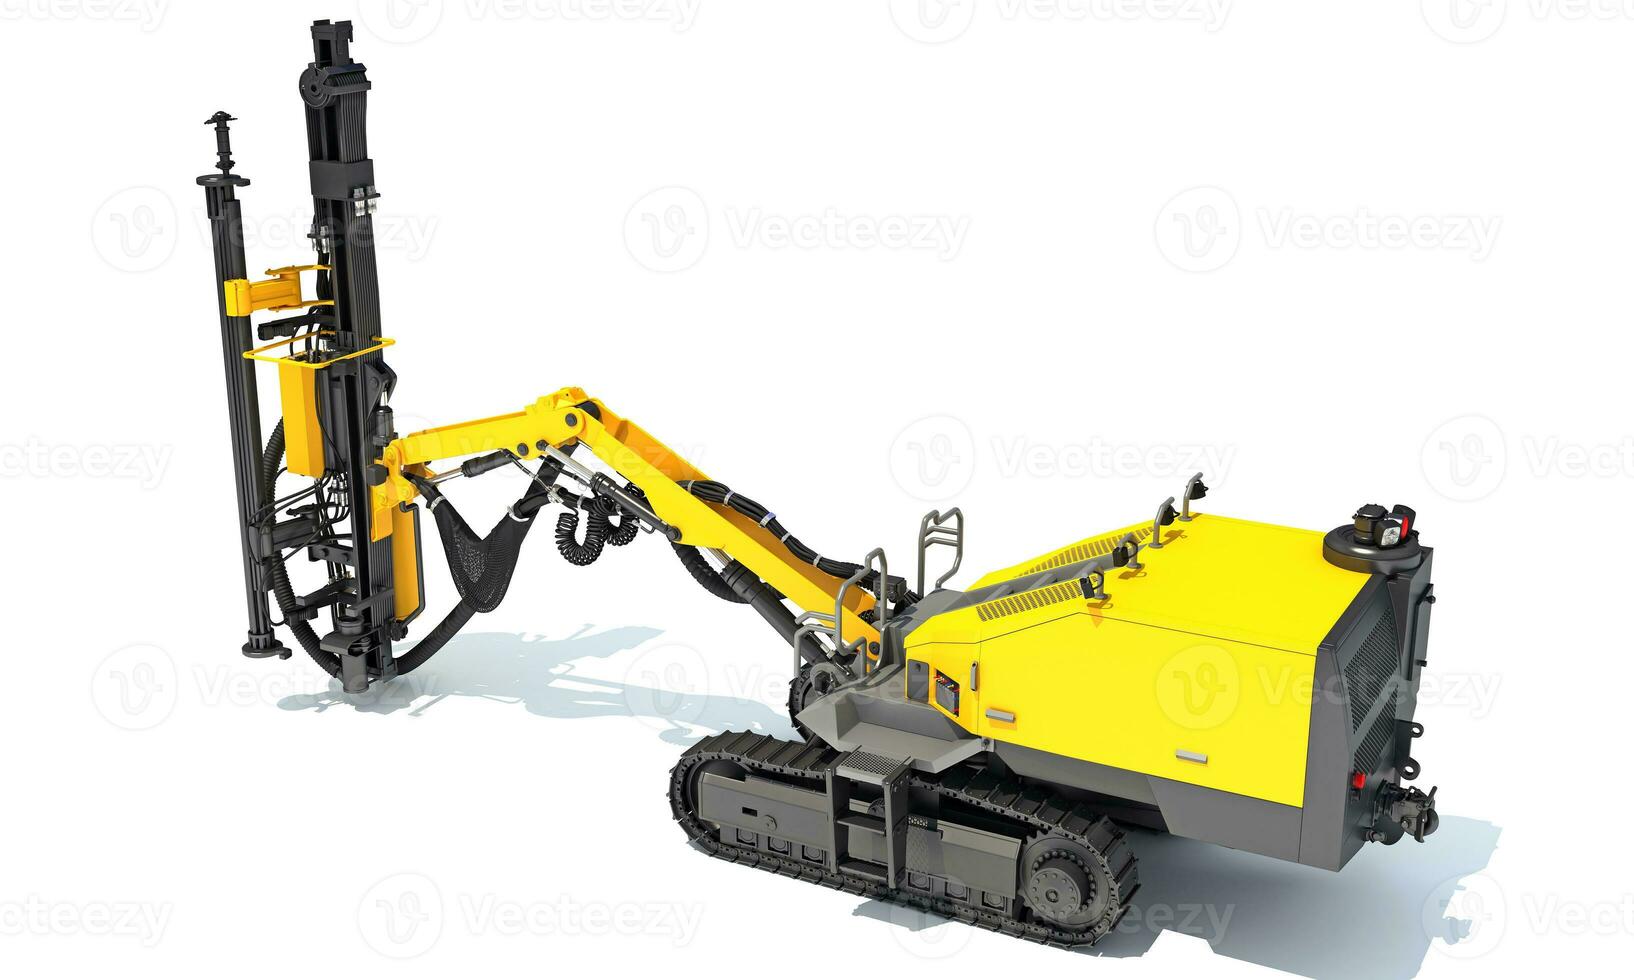 Surface Drilling Rig heavy construction machinery 3D rendering on white background photo